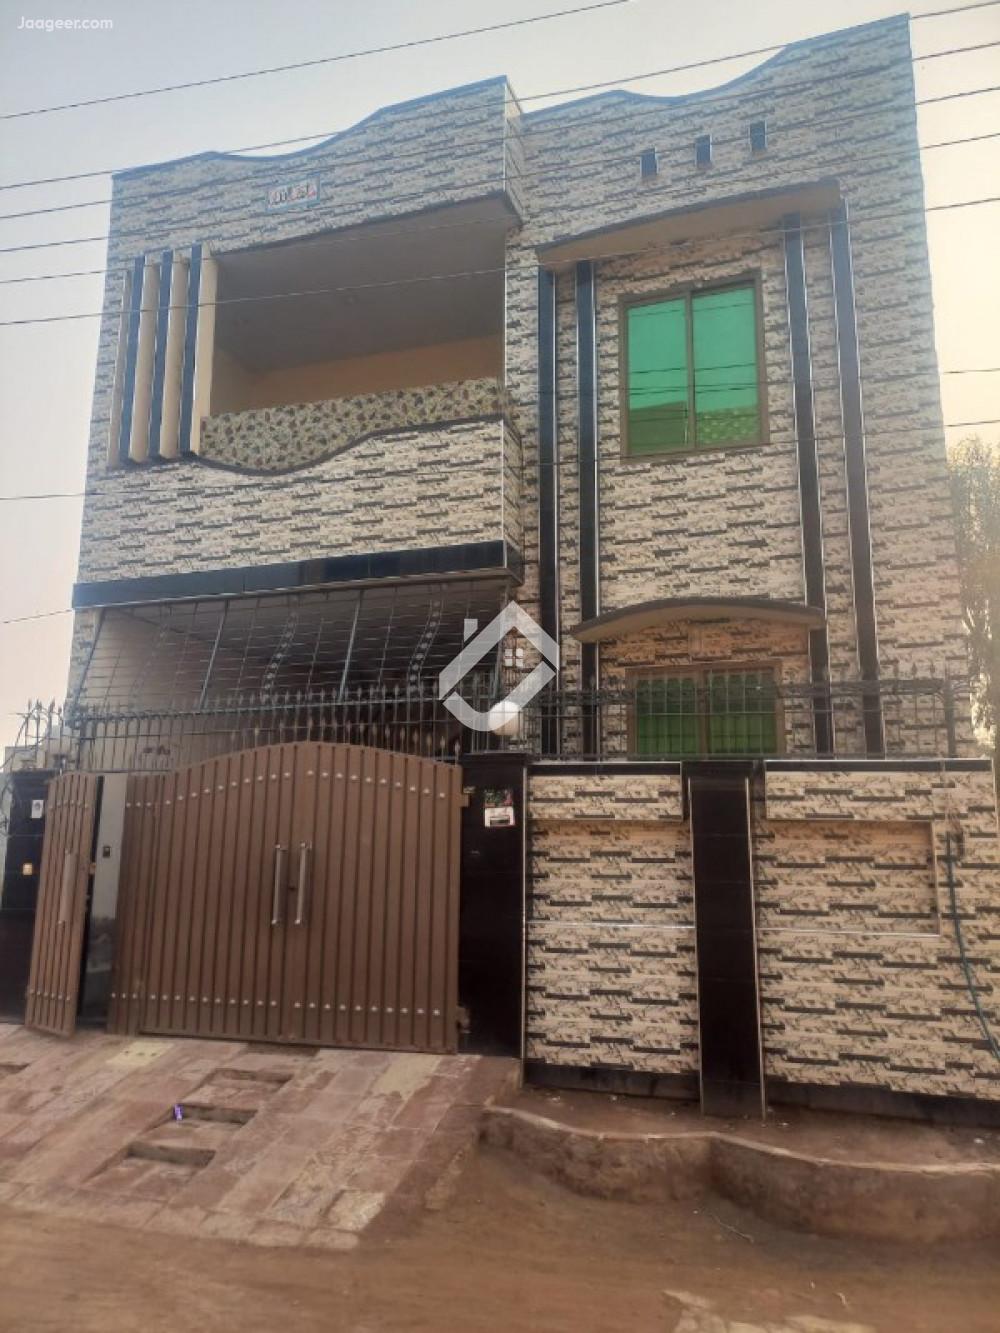 Main image 5 Marla Double Storey House For Sale In Ahsaan Town Near NST  AHSAAN TOWN